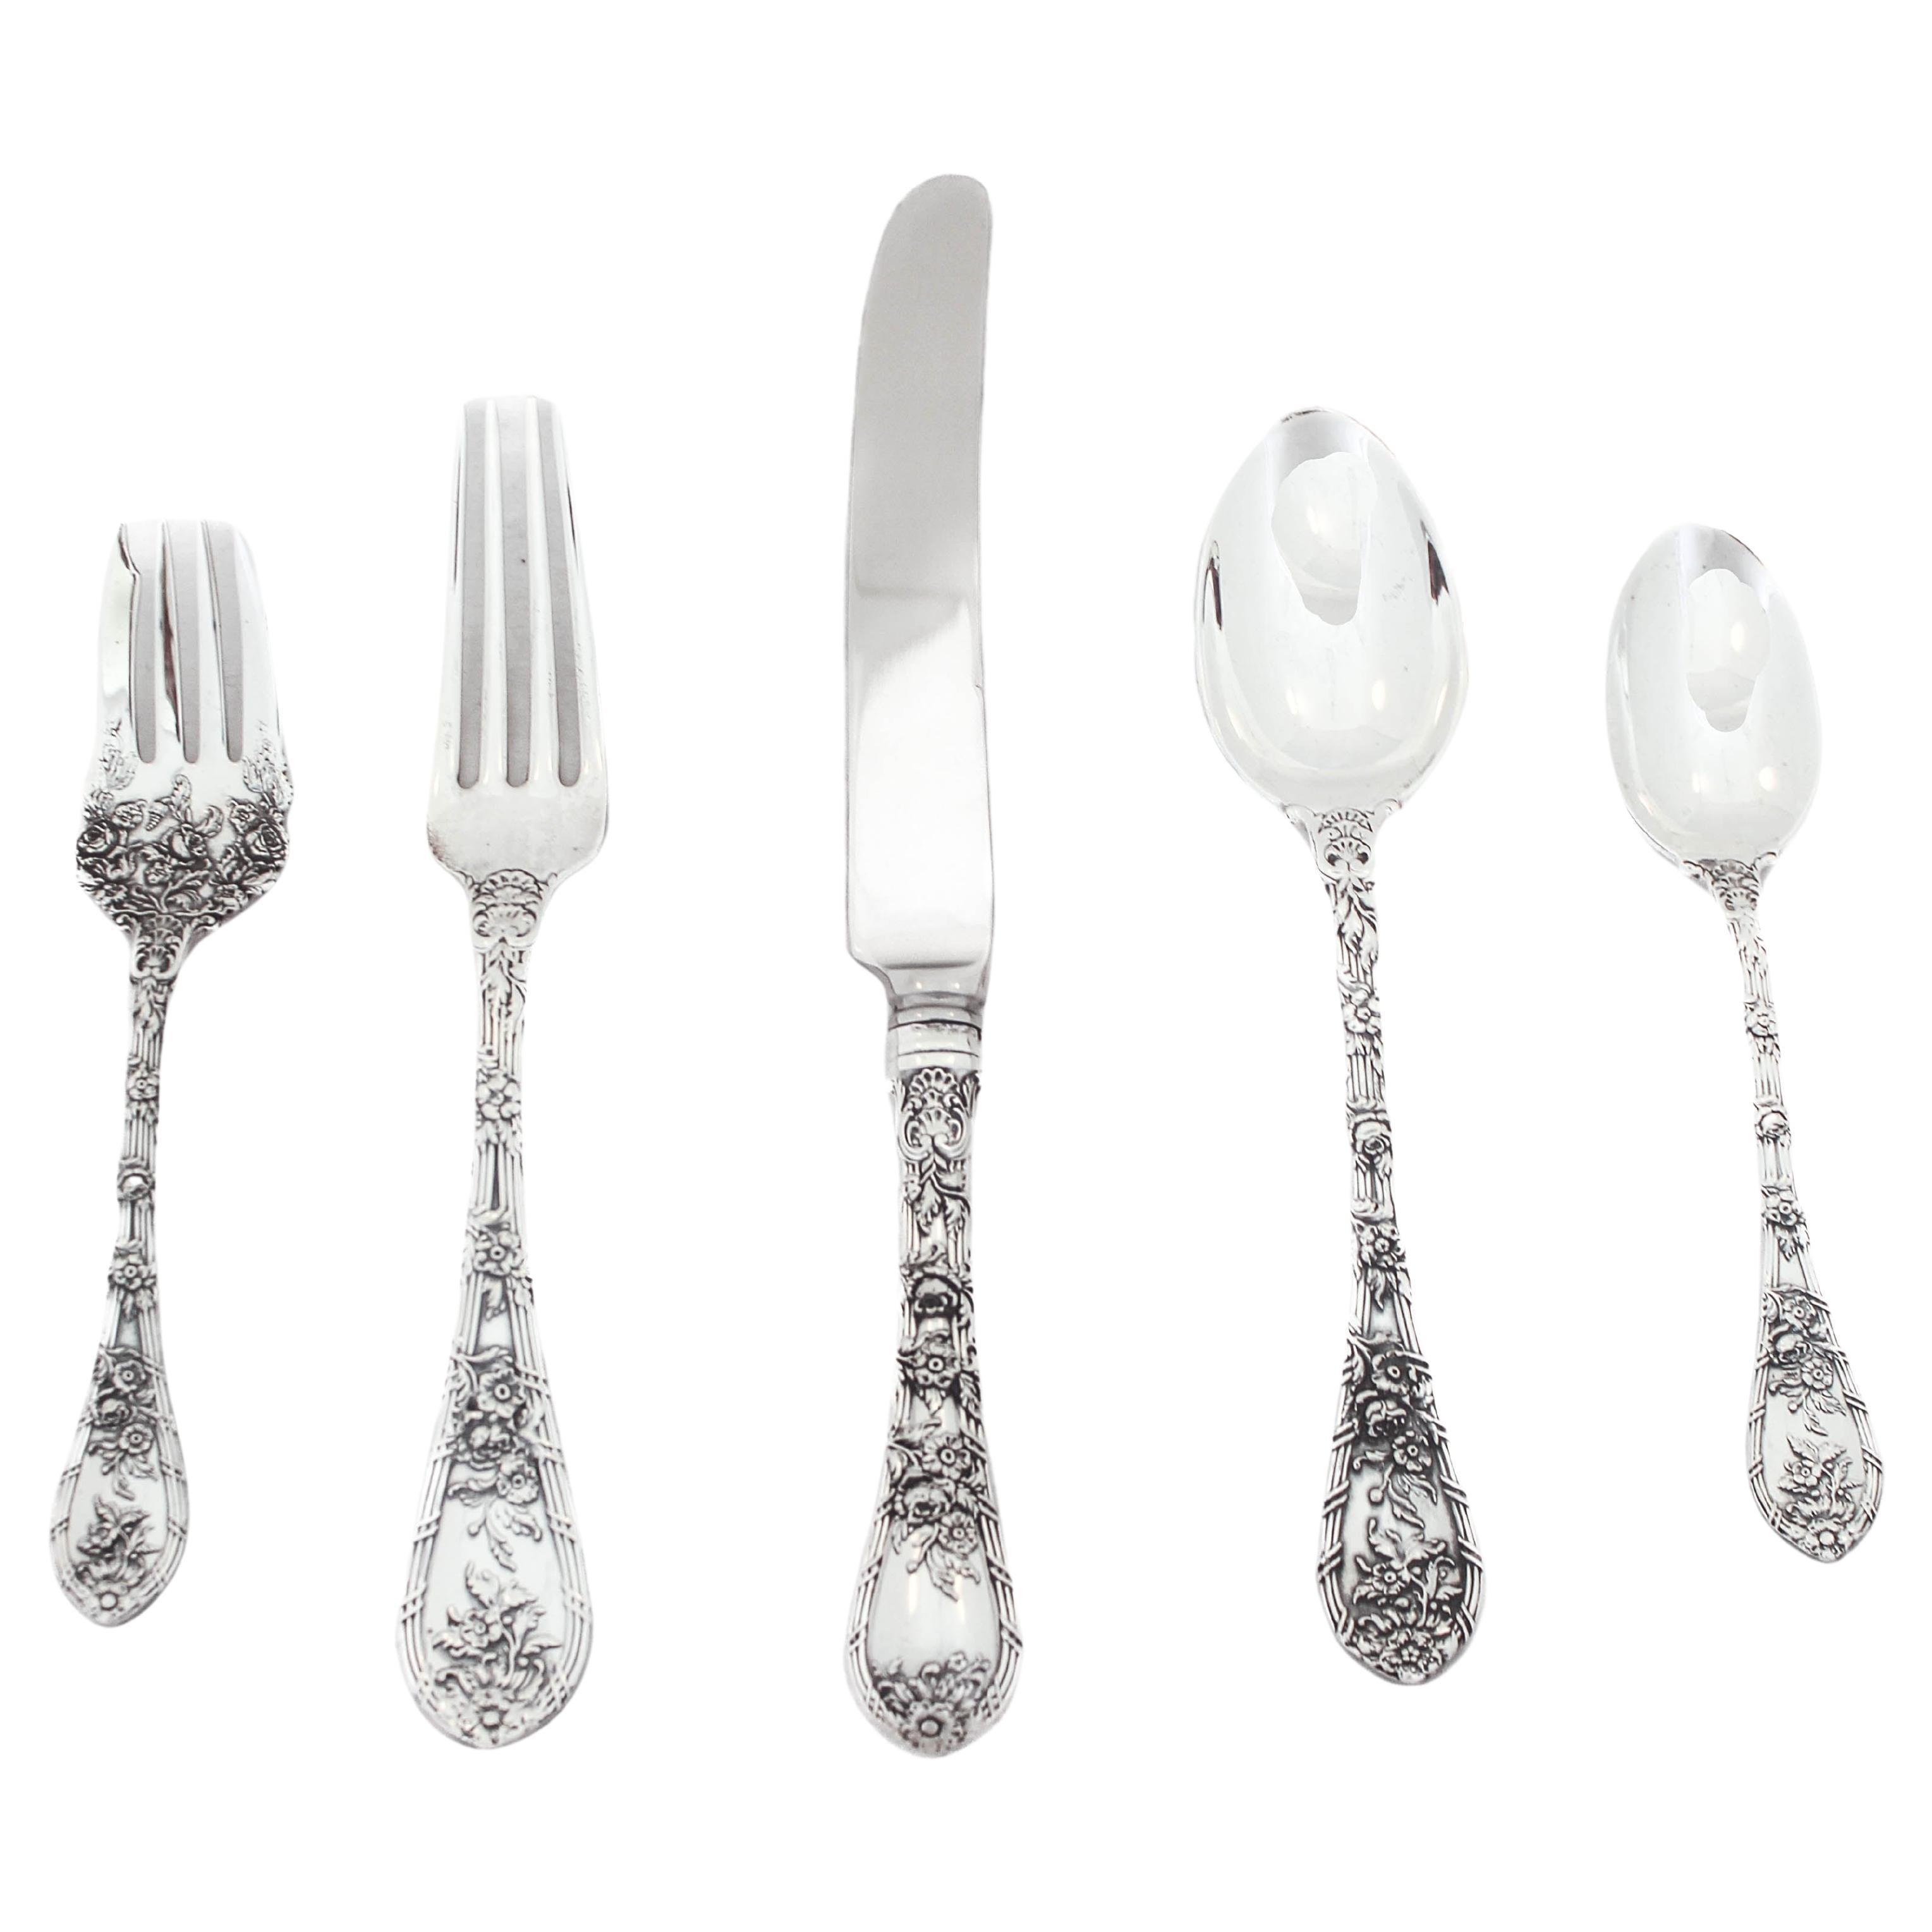 Sterling Silver Flatware/60 pieces For Sale